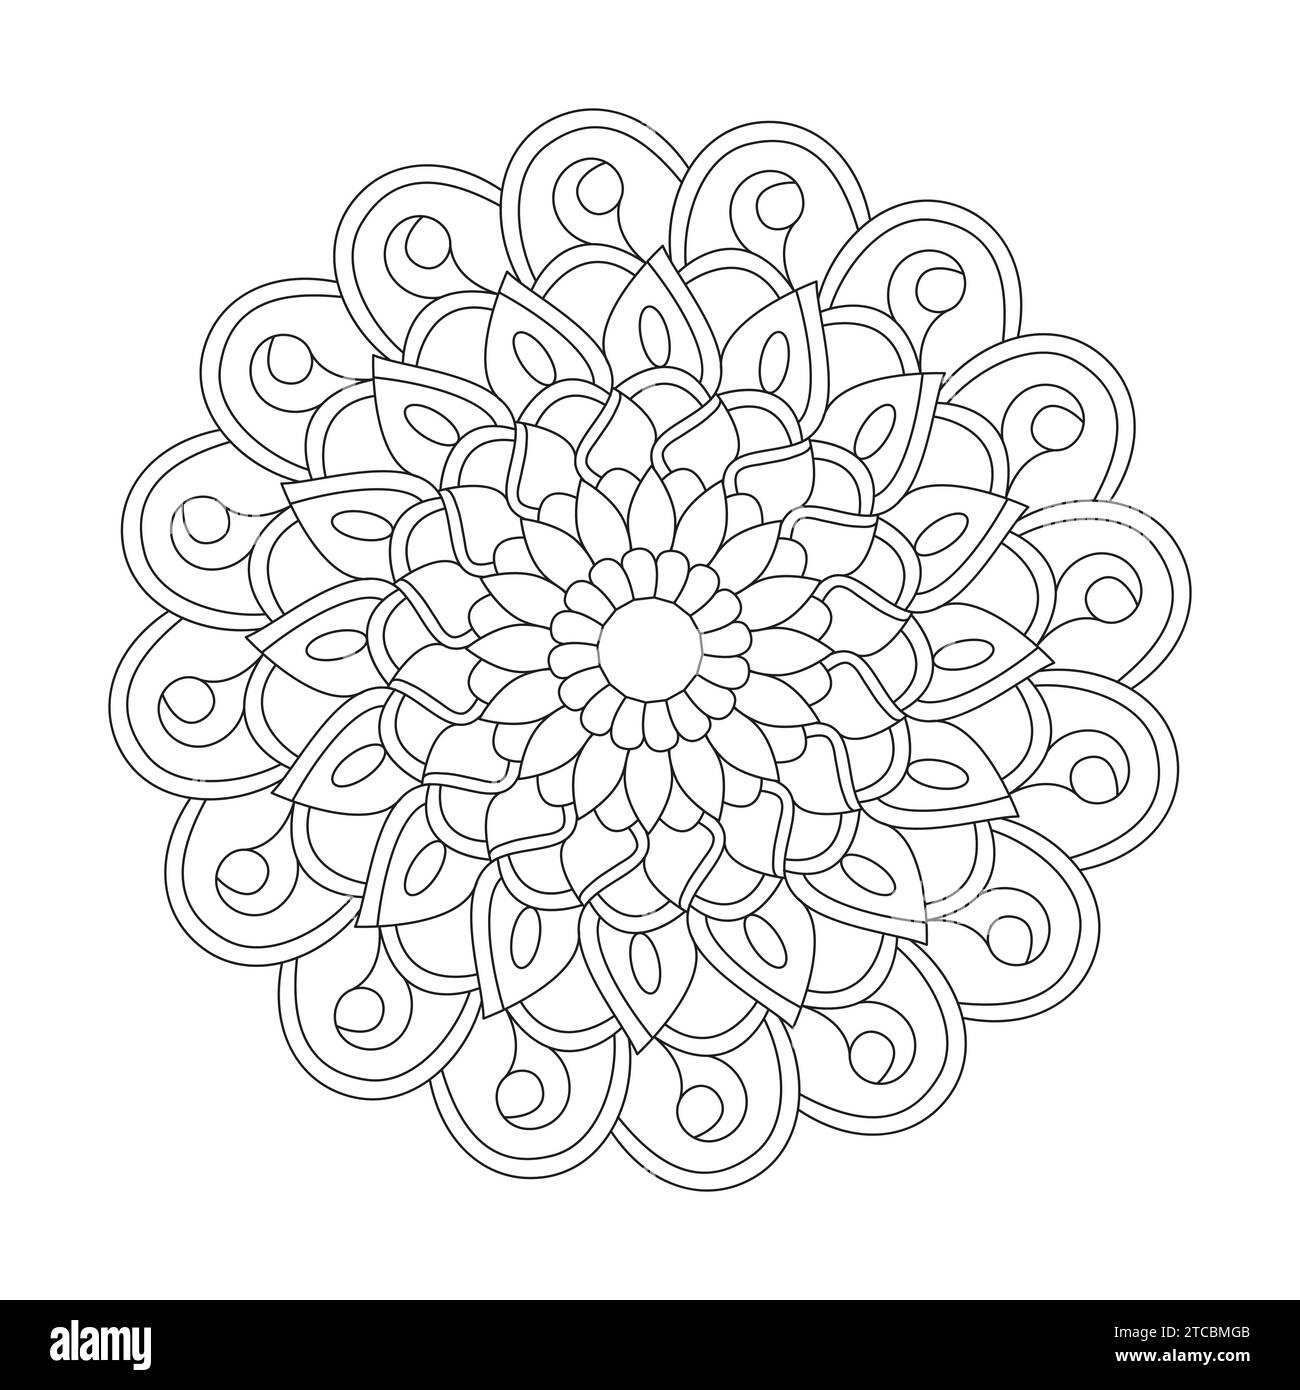 Mandala Dreamcatcher adult colouring book page for KDP book interior. Peaceful Petals, Ability to Relax, Brain Experiences, Harmonious Haven, Peaceful Stock Vector